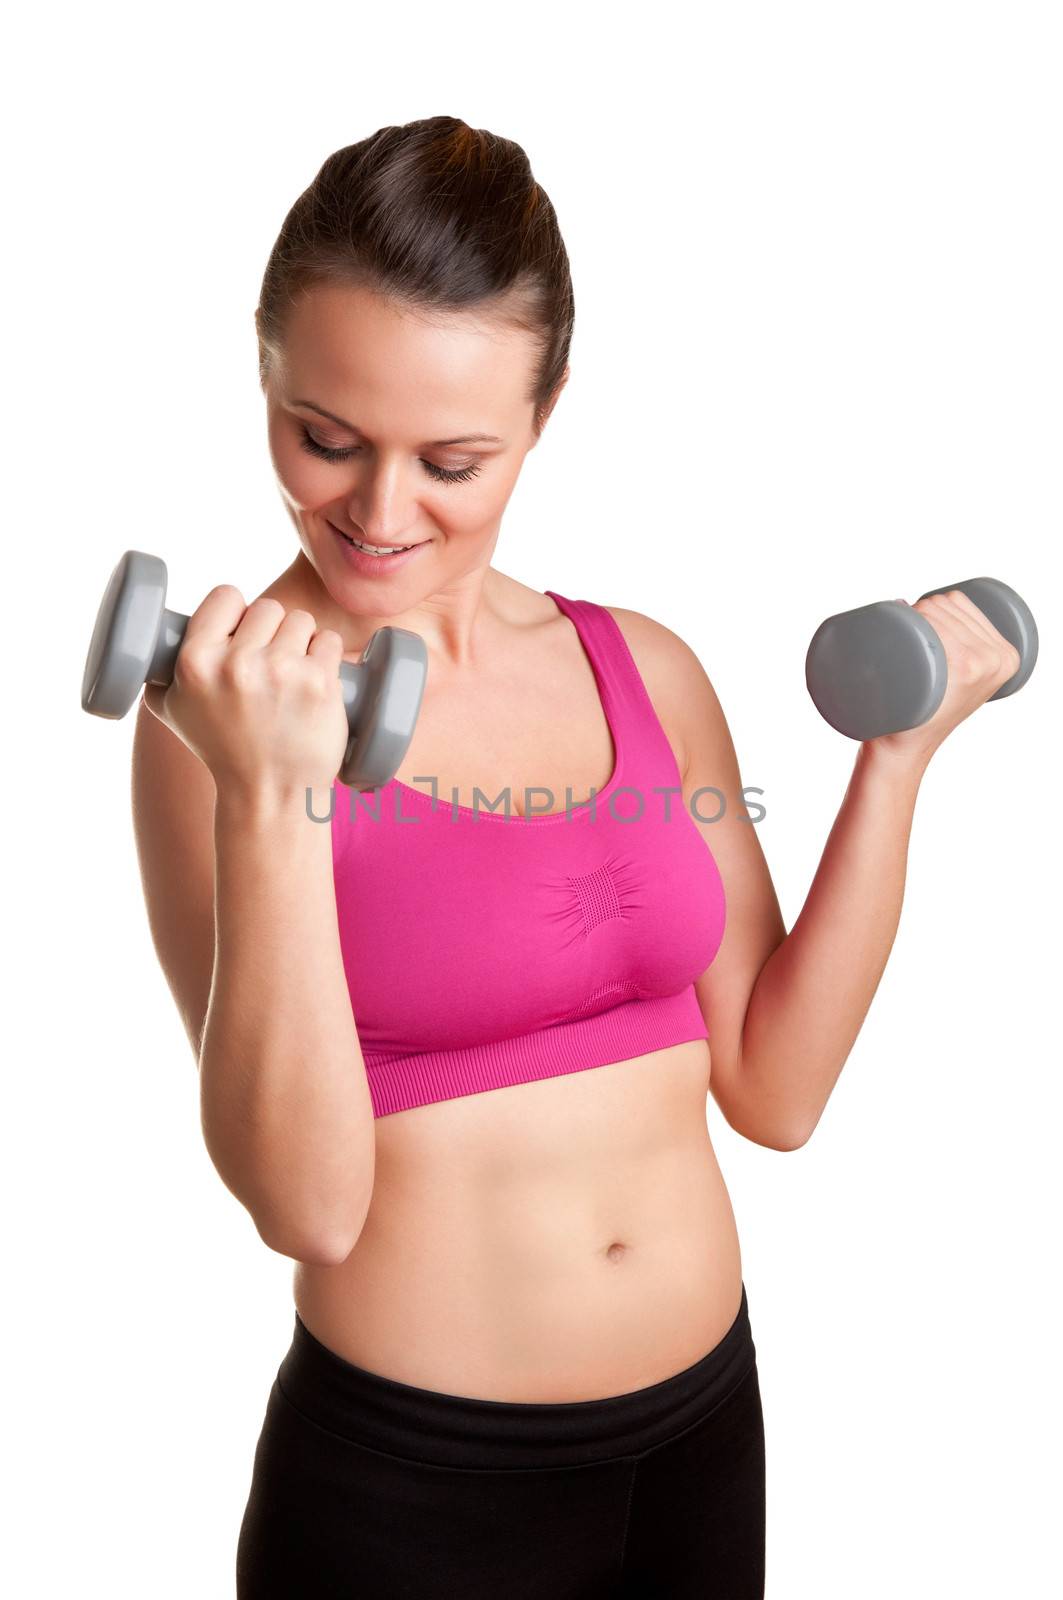 Woman working out with dumbbells at a gym, isolated in a white background